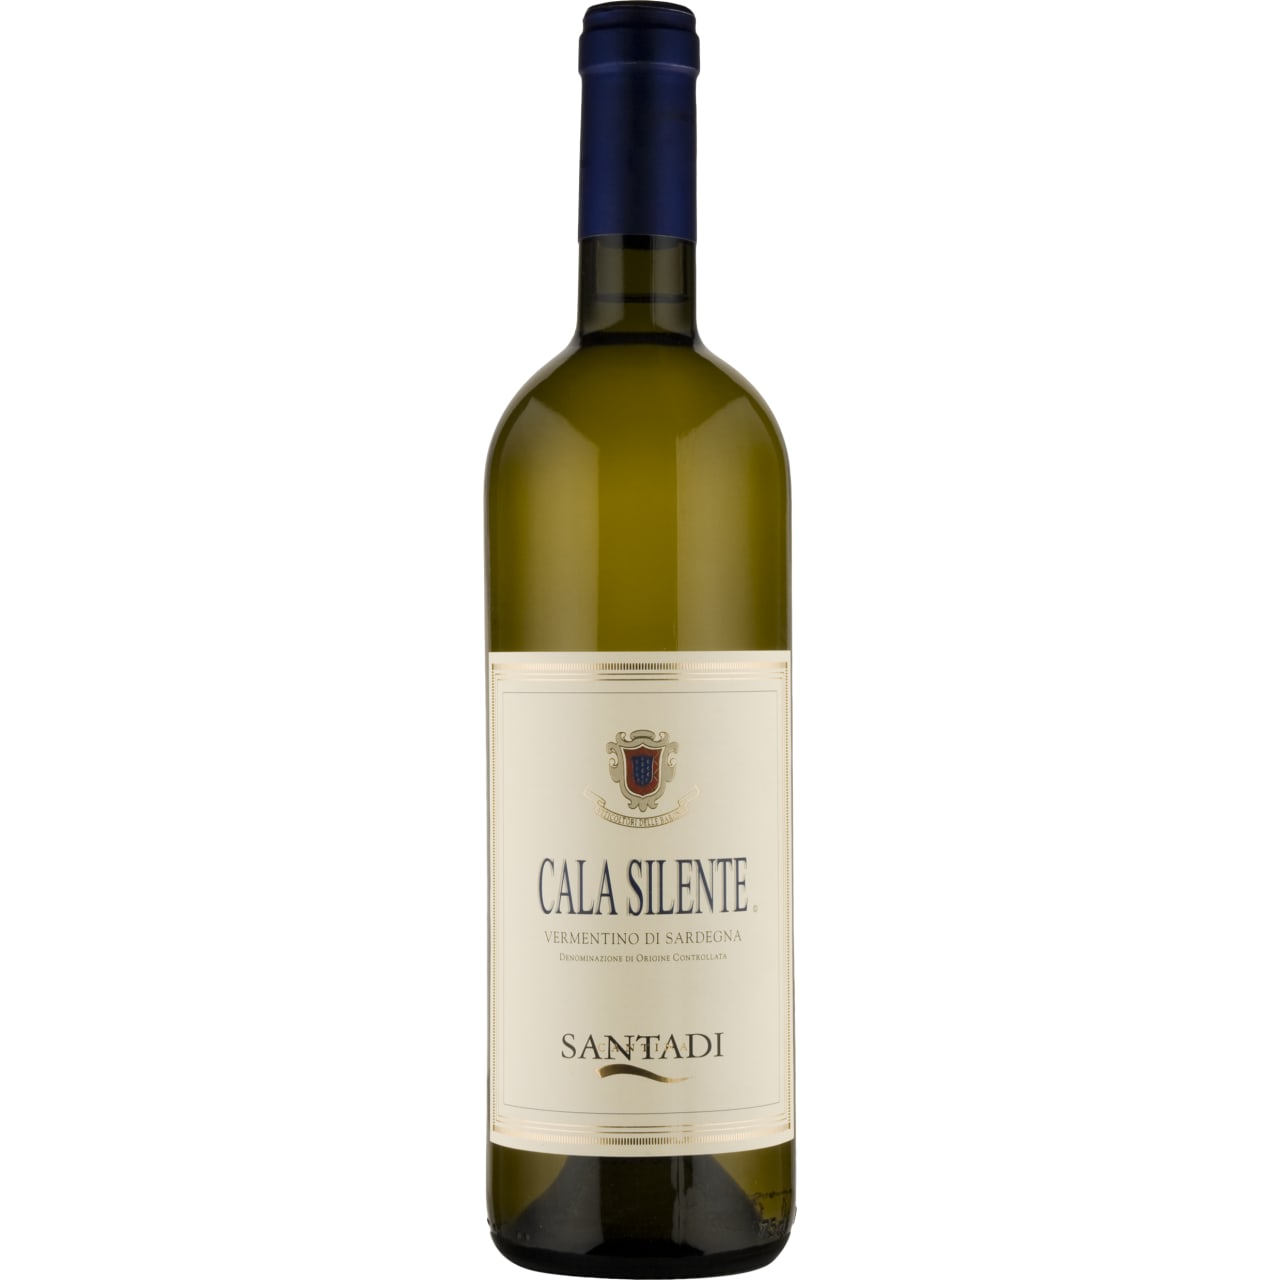 Pale green colour, with exciting lemon and peach aromas that are also evident on the palate.